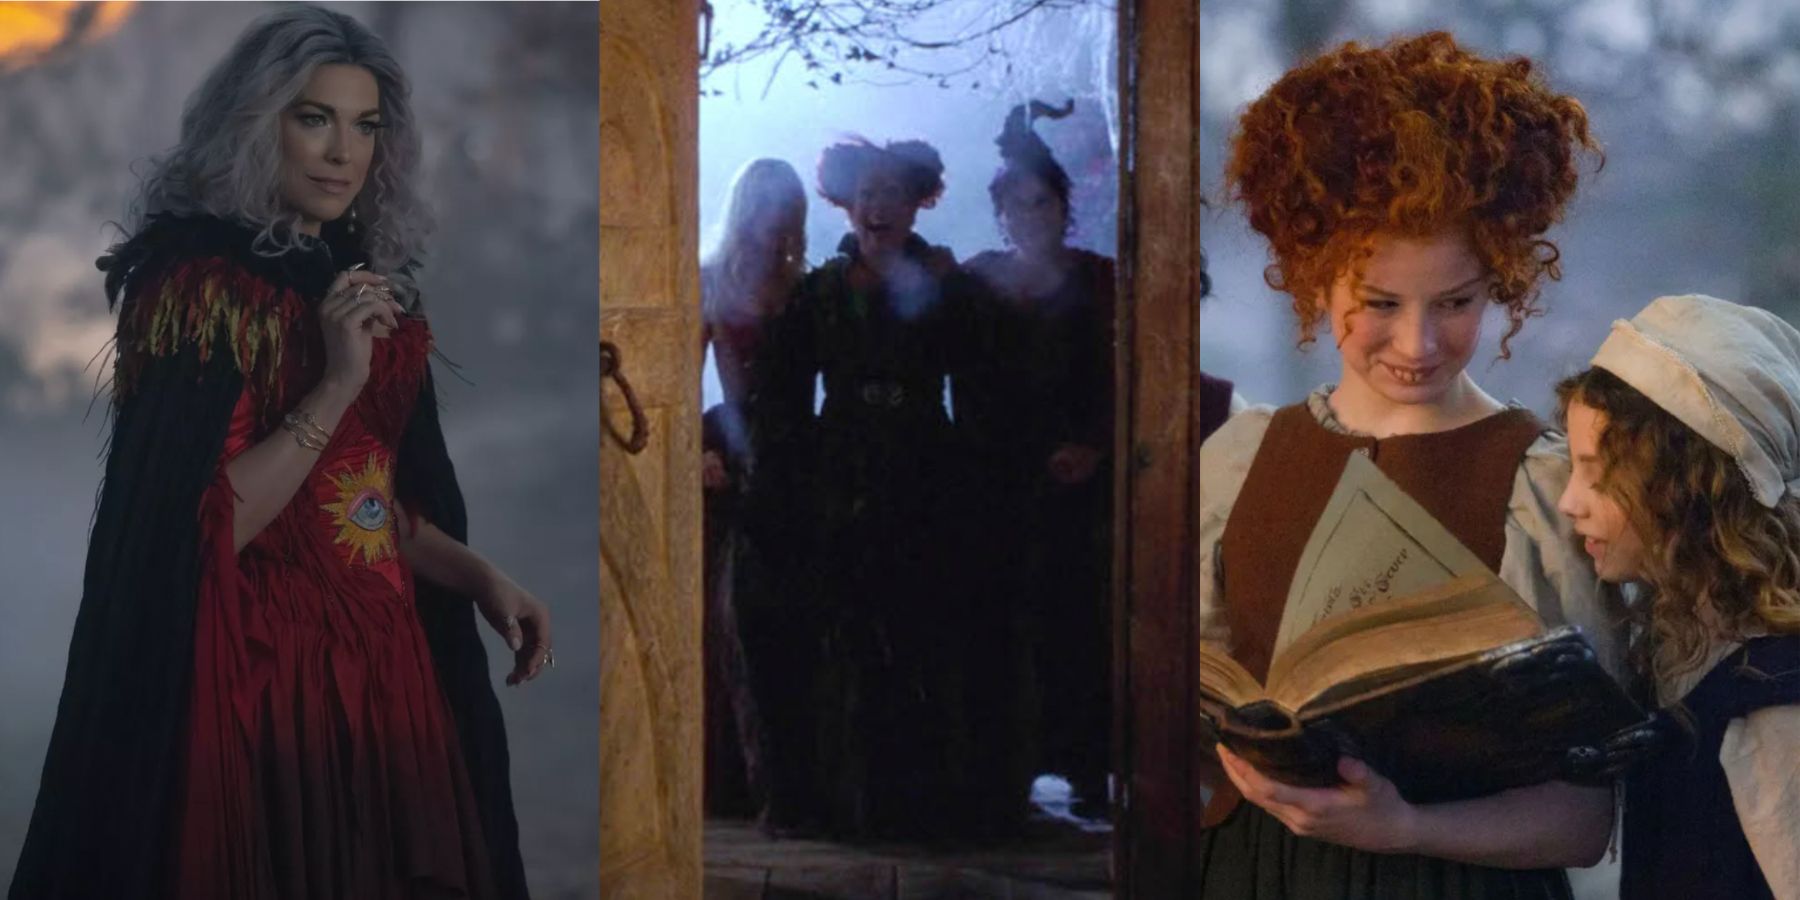 A split image features the Mother Witch, the Sanderson sisters in 1993, and the Sanderson sisters in 1653 in Hocus Pocus and Hocus Pocus 2